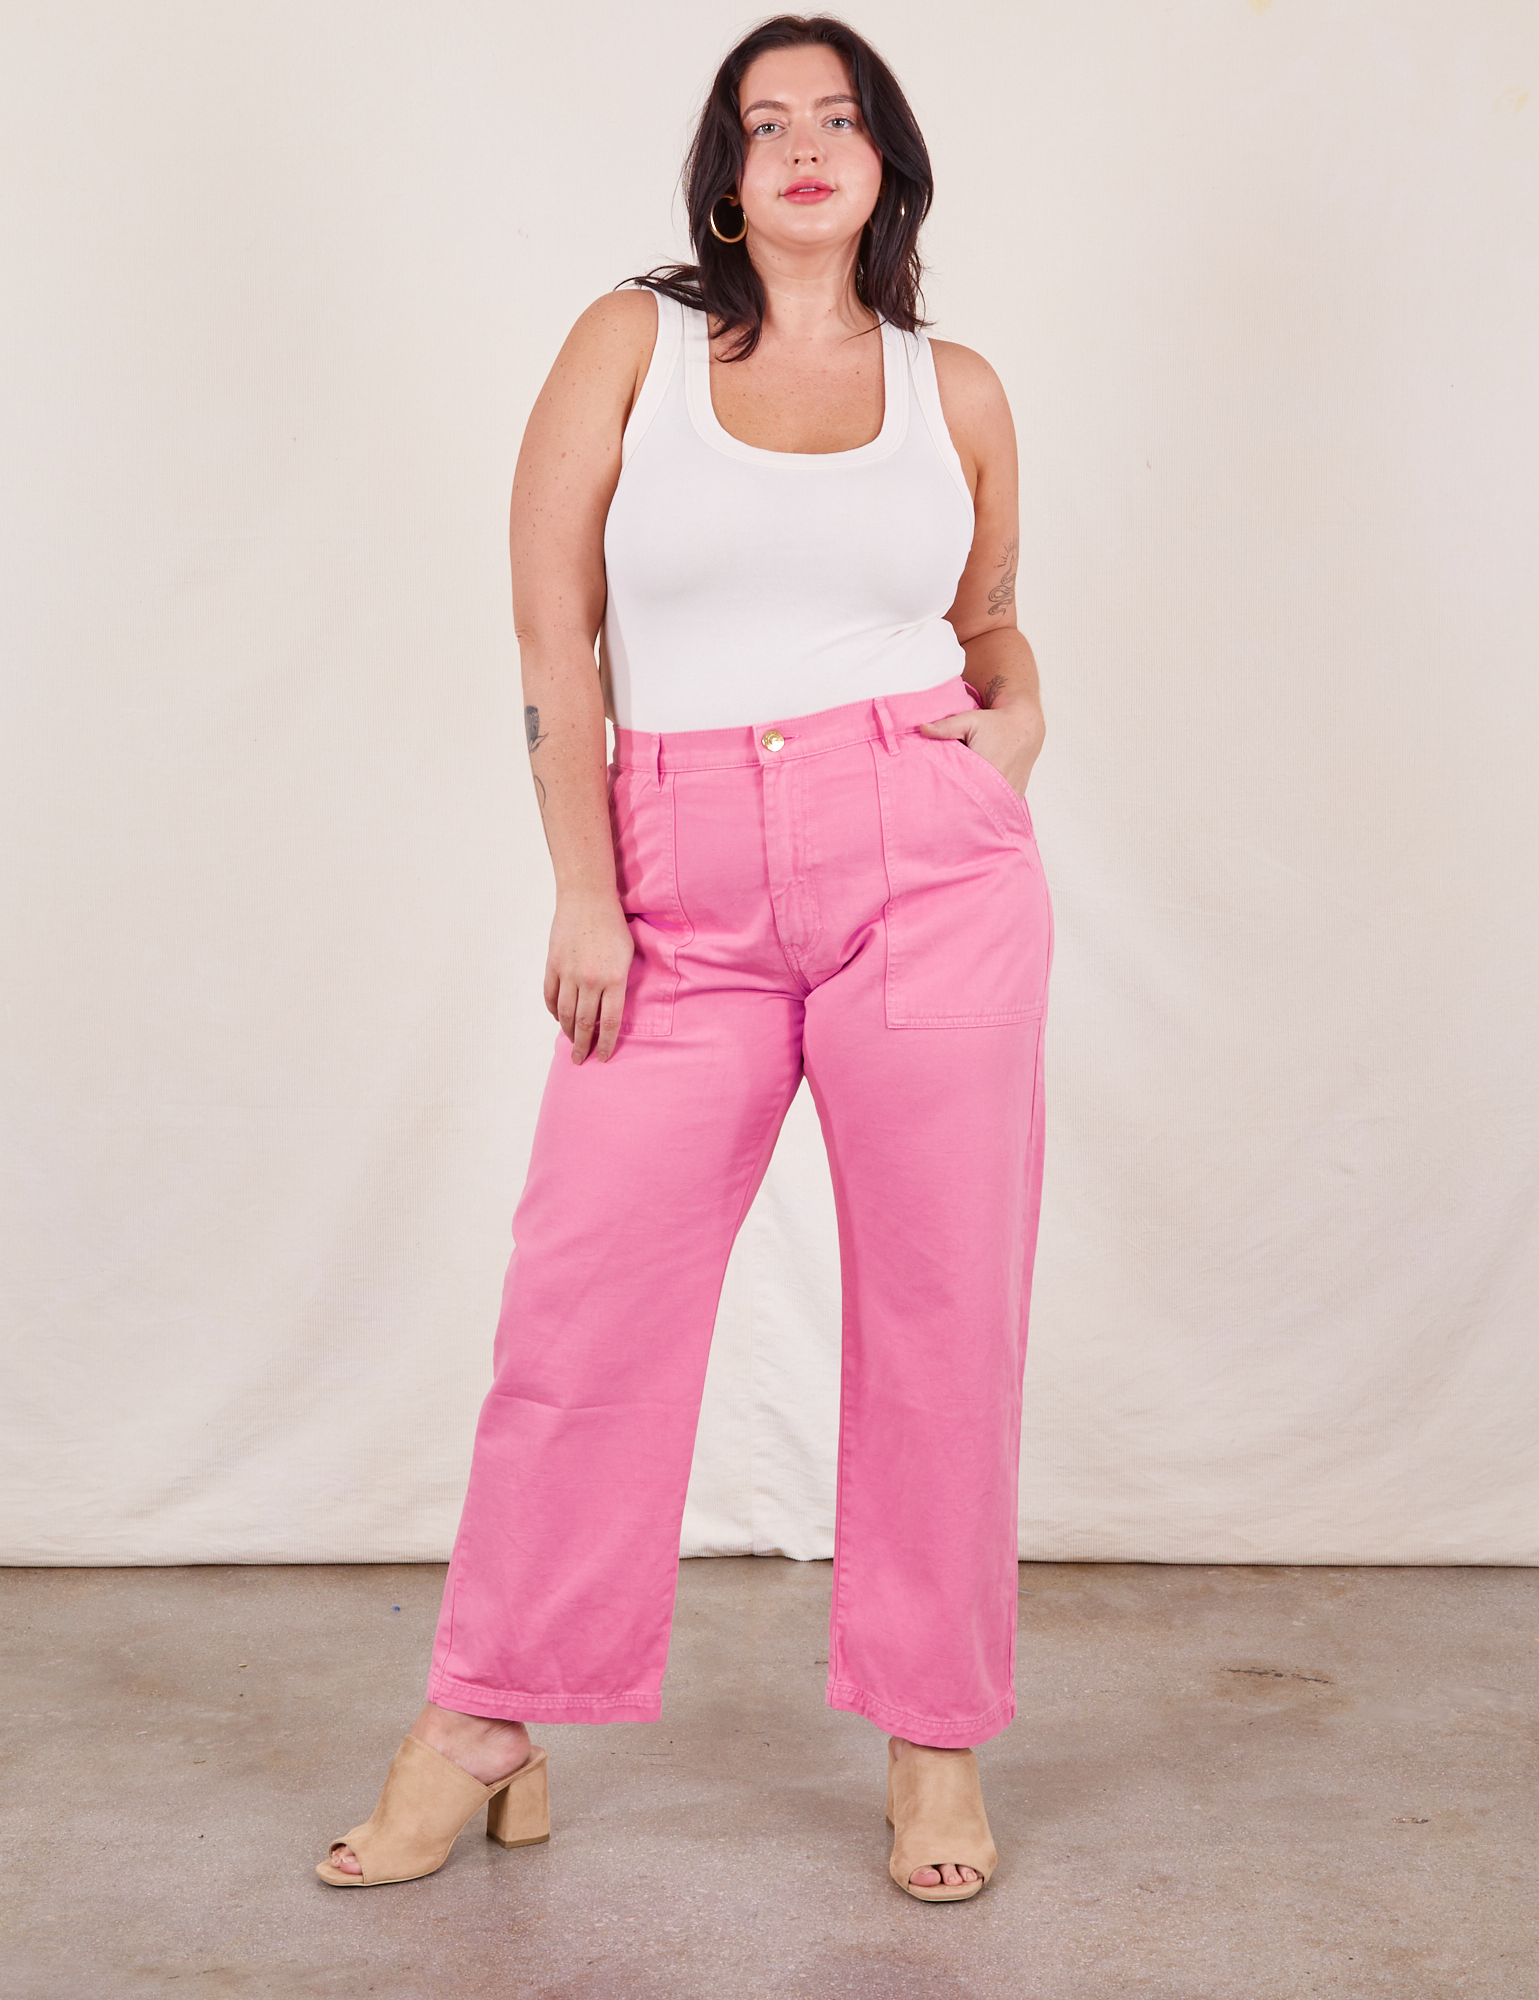 Faye is 5&#39;7&quot; and wearing L Work Pants in Bubblegum Pink paired with a Tank Top in vintage tee off-white